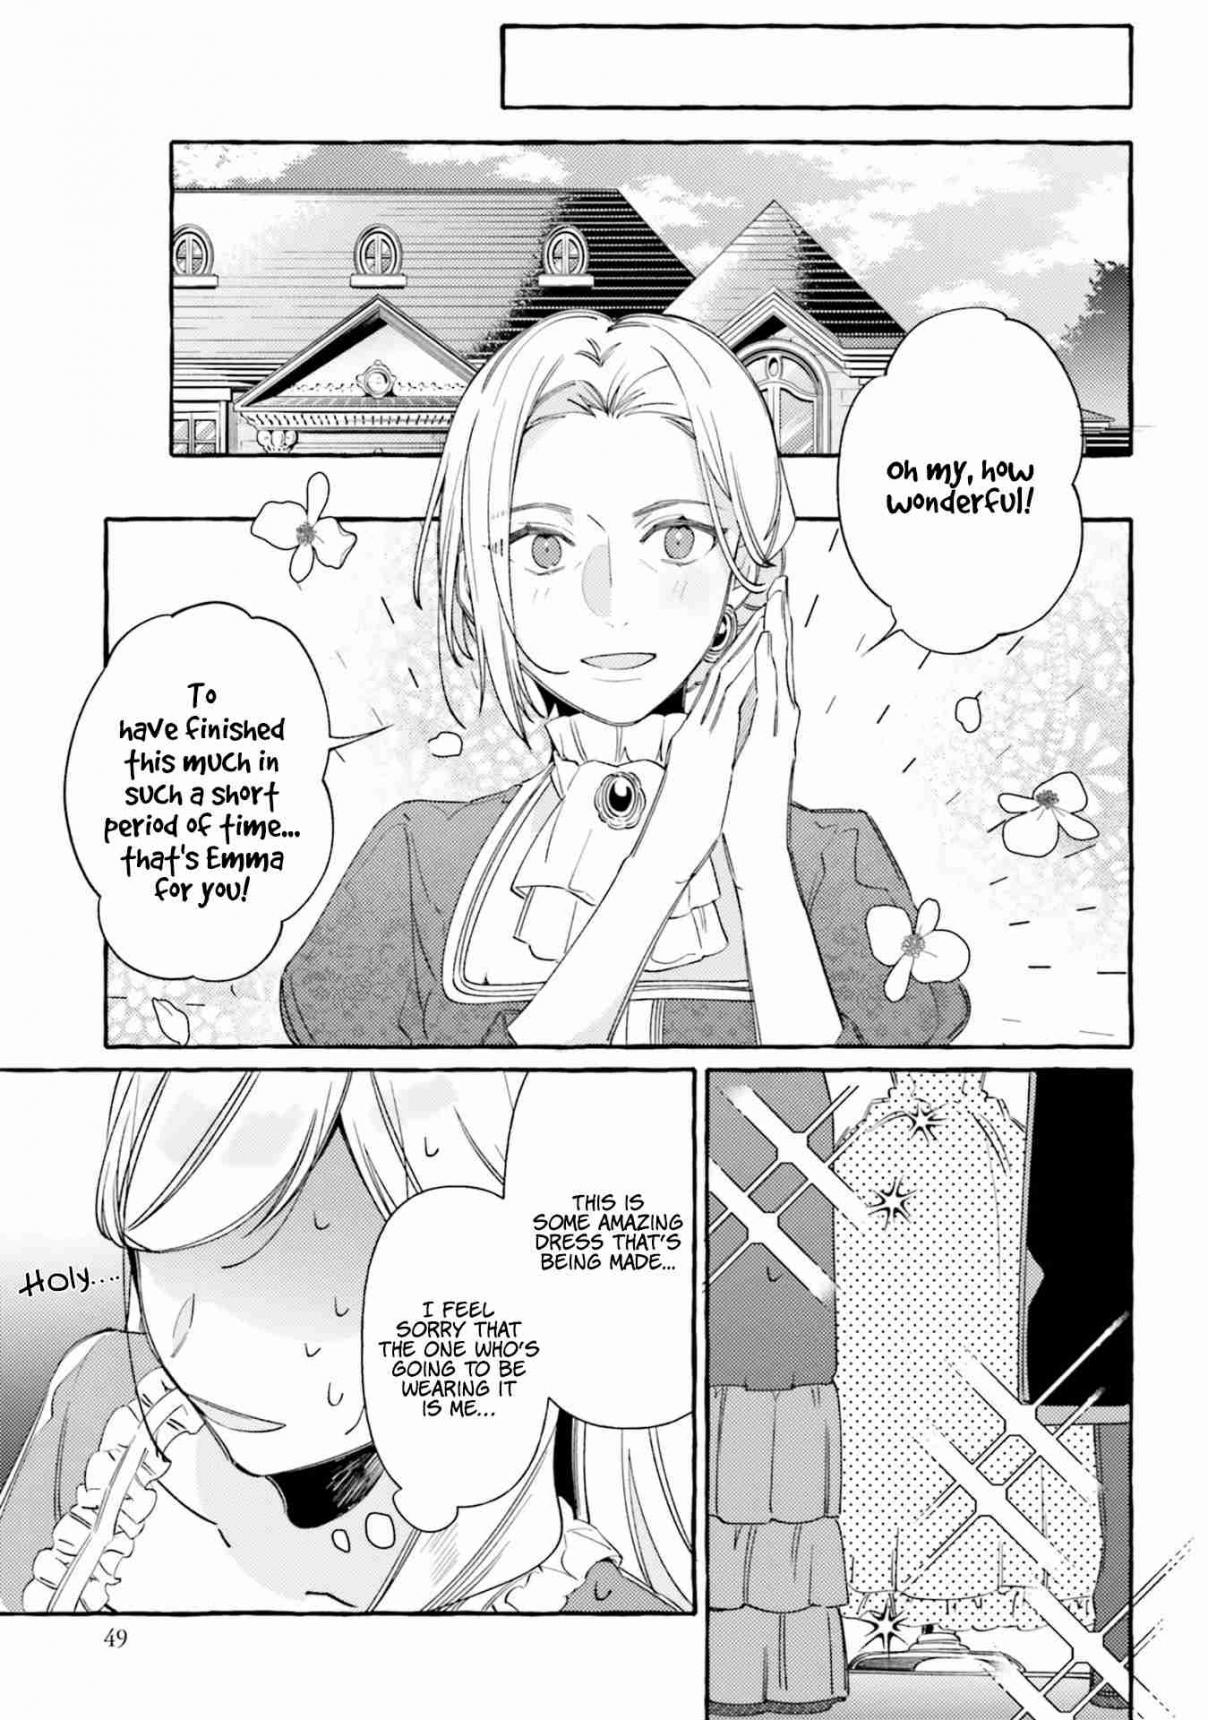 Fiancée Be Chosen by the Ring Vol. 2 Ch. 7 Love for Her